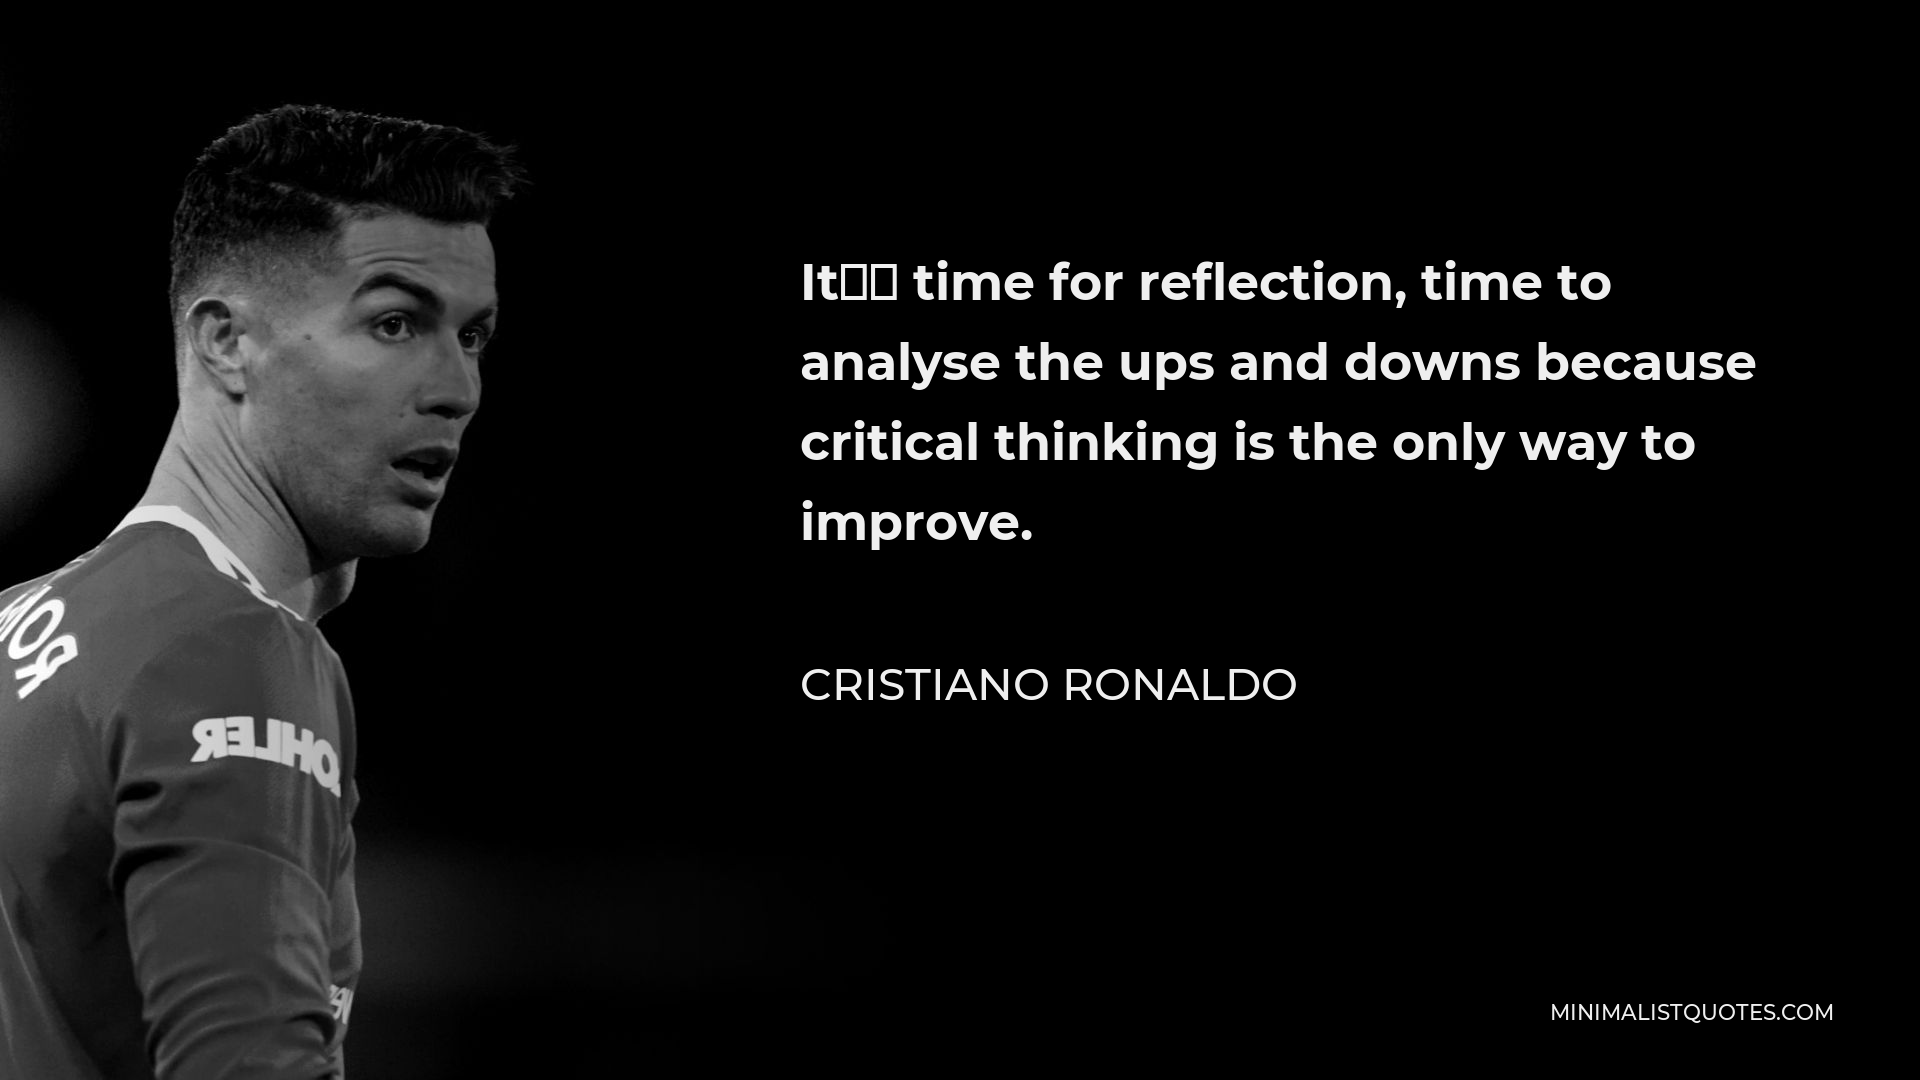 Cristiano Ronaldo Quote - It’s time for reflection, time to analyse the ups and downs because critical thinking is the only way to improve.